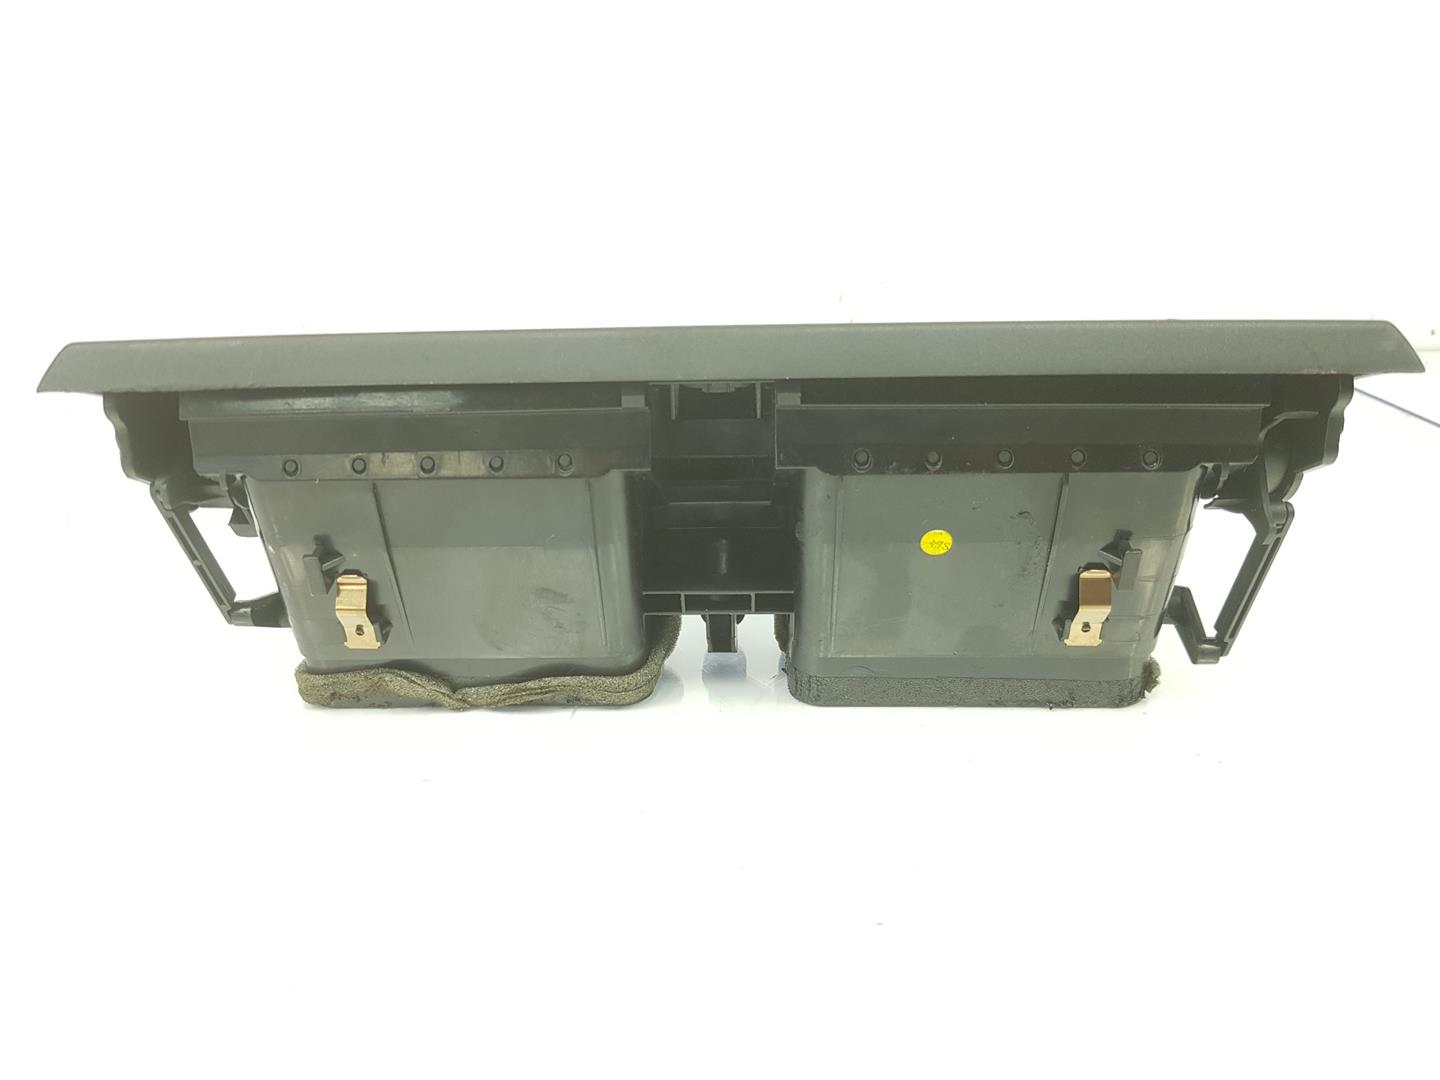 BMW X3 E83 (2003-2010) Other Interior Parts 64223400074, 3400074 21075574